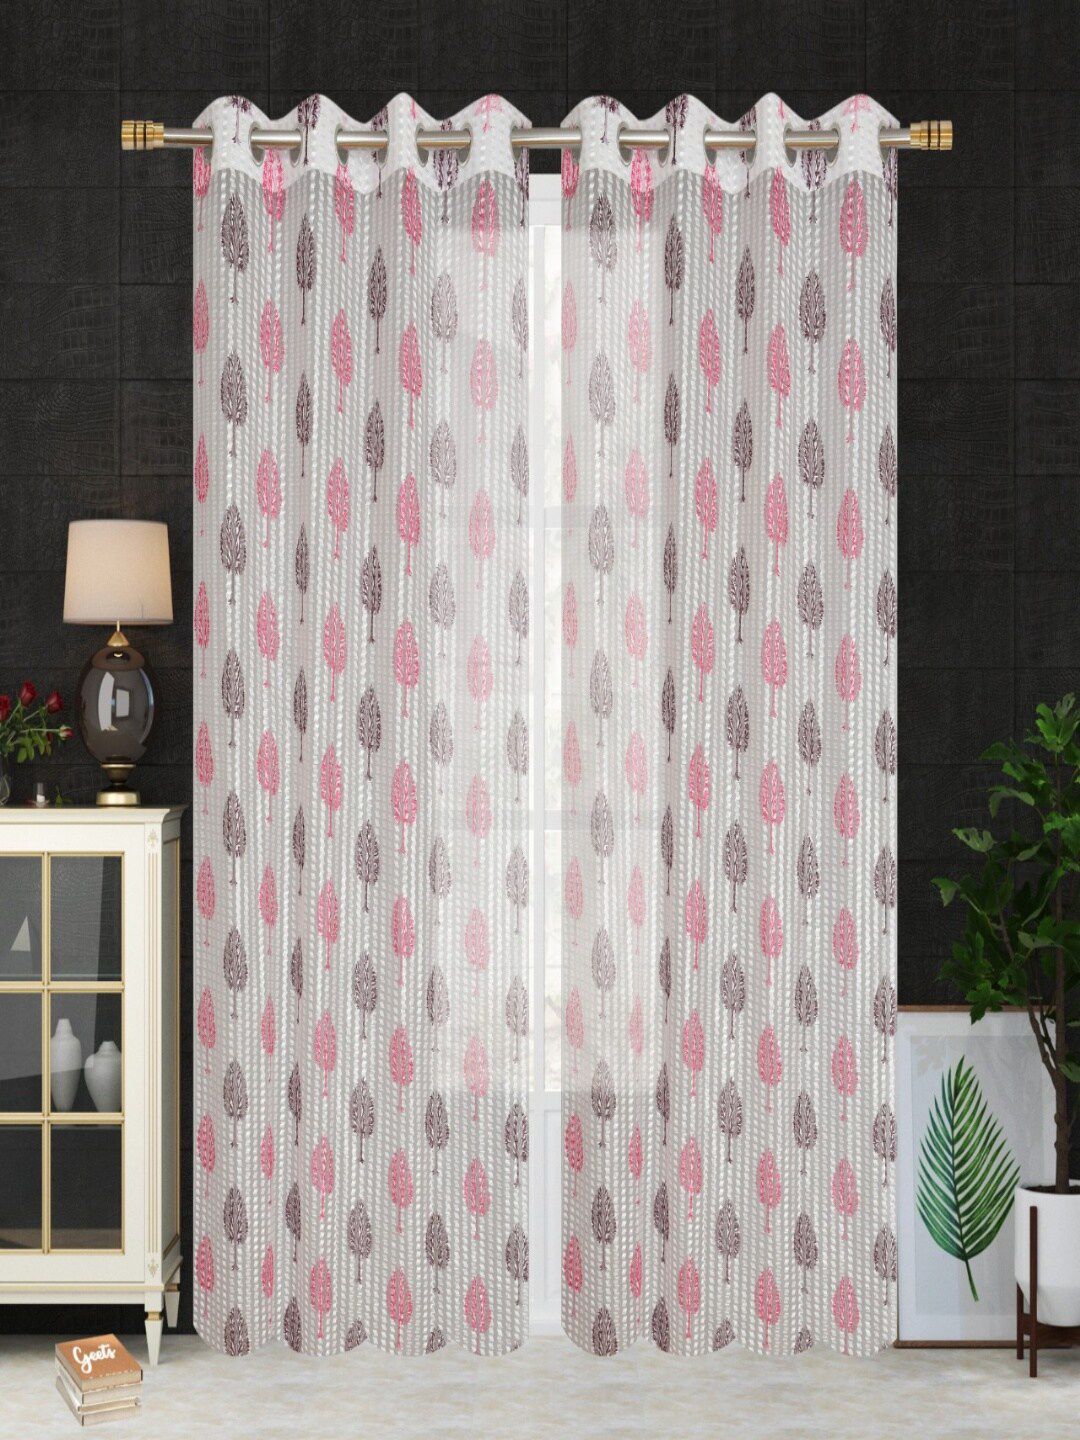 Homefab India Pink & White Set of 2 Floral Sheer Window Curtain Price in India